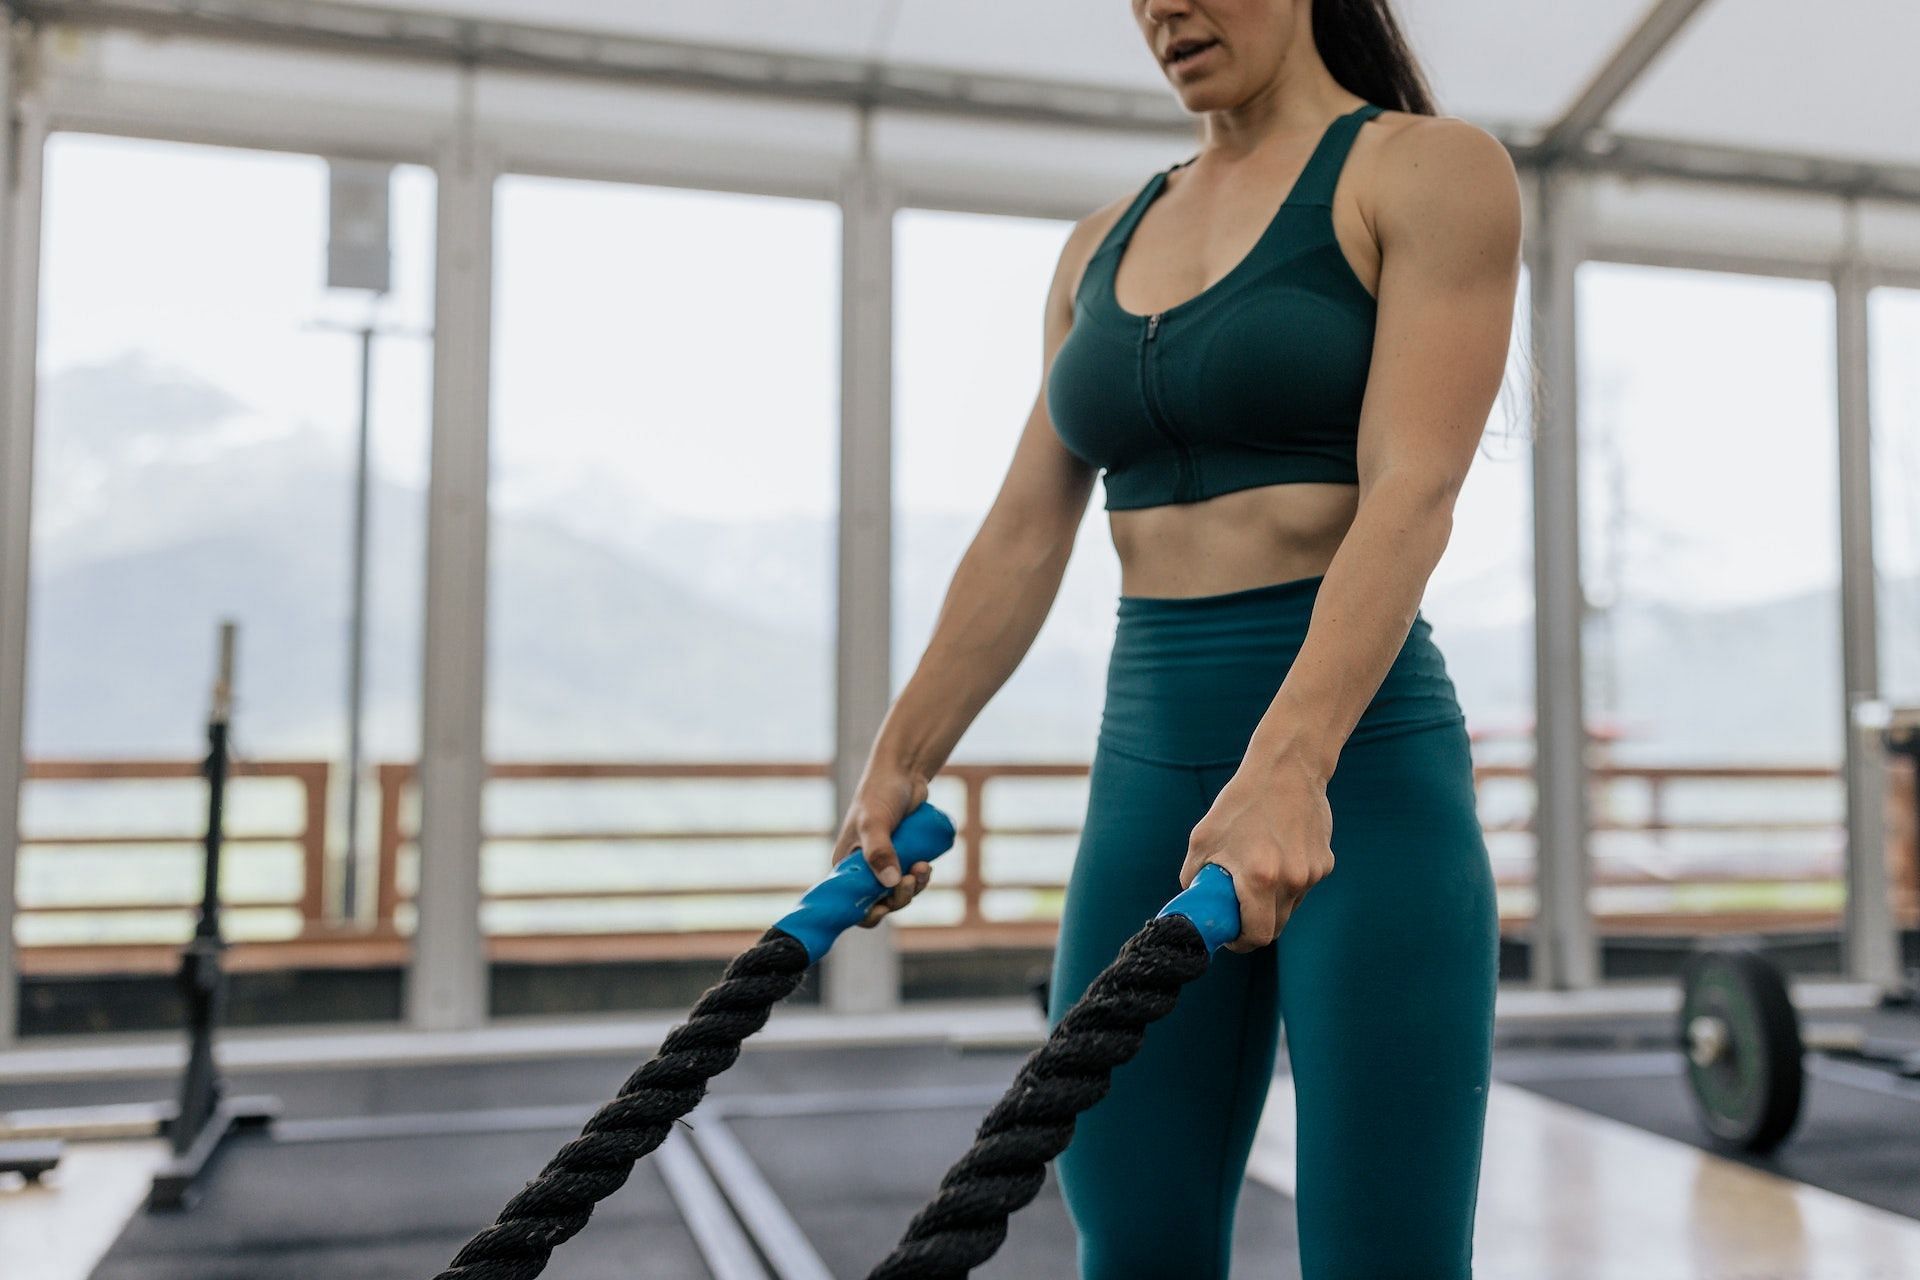 Working out in a cooler environment eases face redness. (Photo via Pexels/Anastasia Shuraeva)